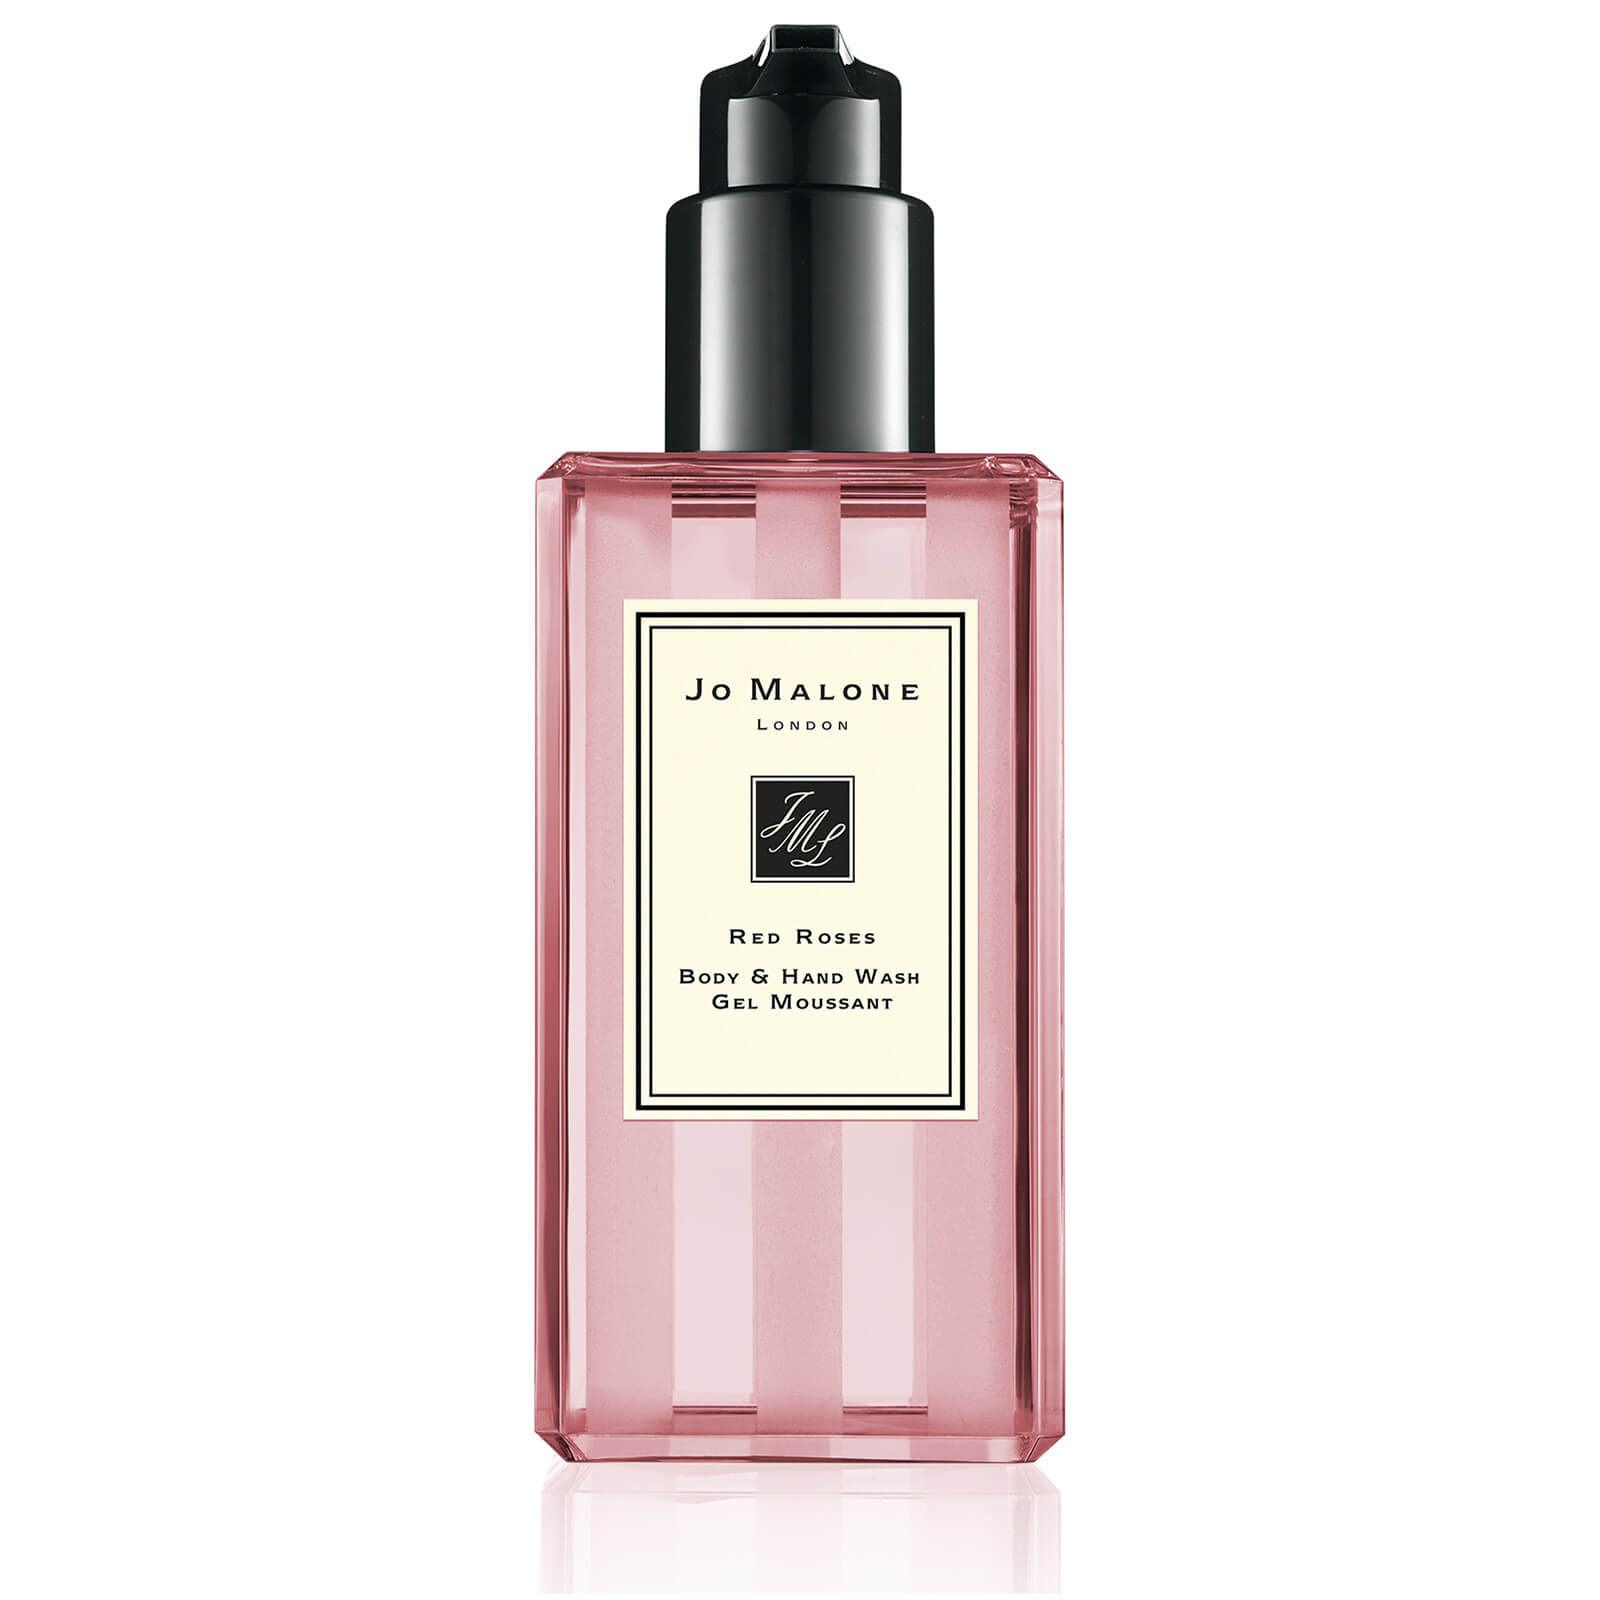 Jo Malone London Red Roses Body and Hand Wash 250ml